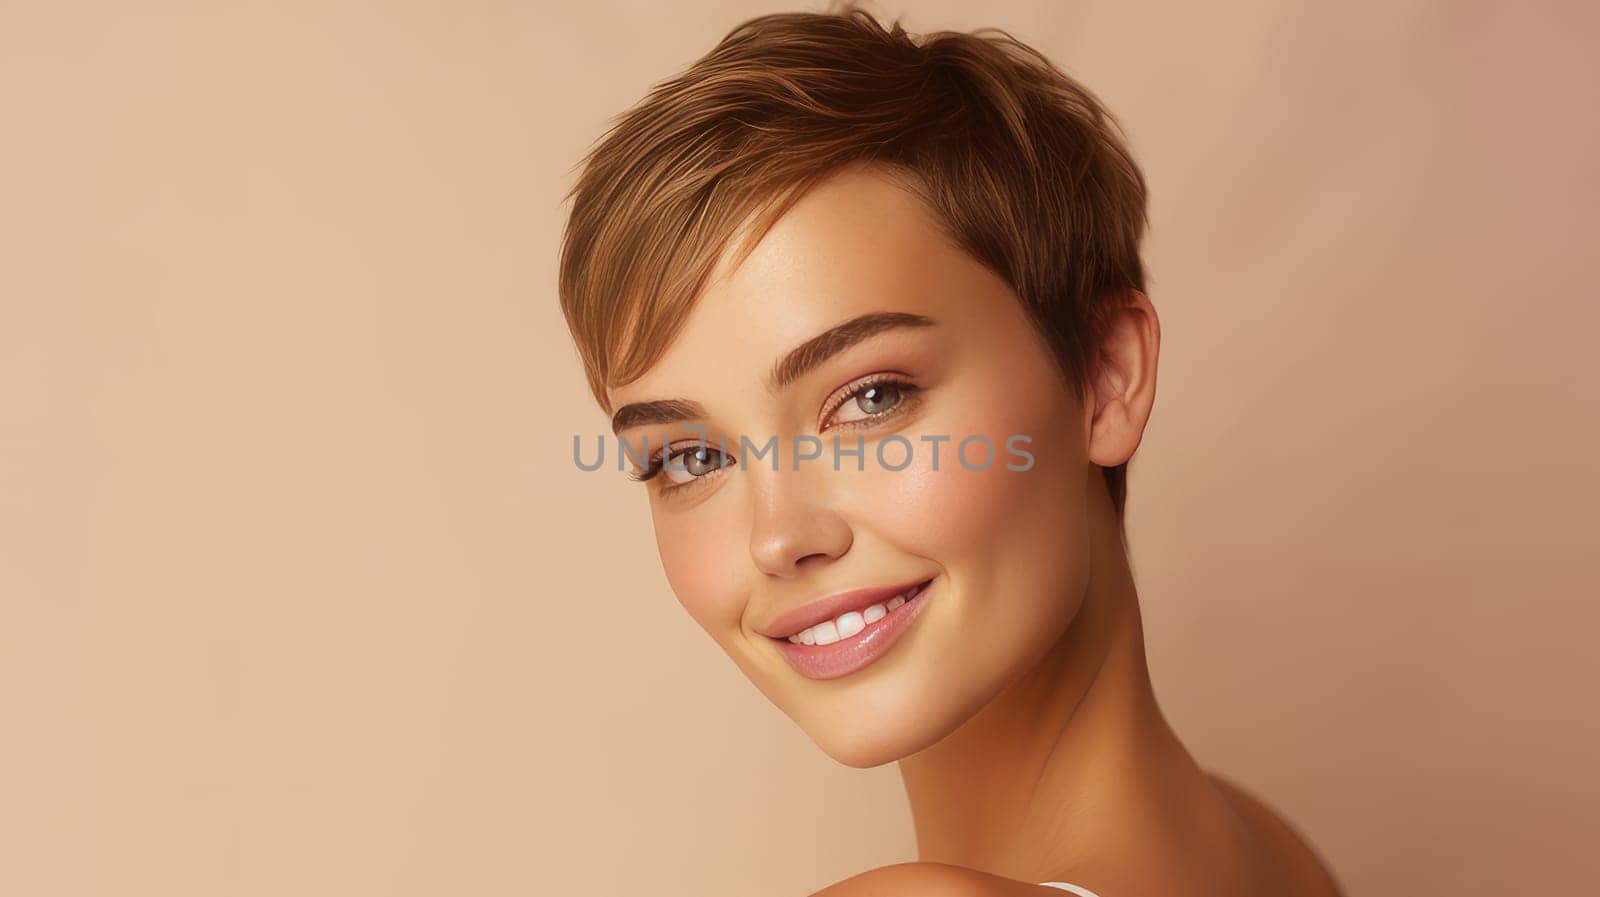 Portrait of a beautiful, sexy smiling Caucasian woman with perfect skin and short haircut, on a creamy beige background. by Alla_Yurtayeva